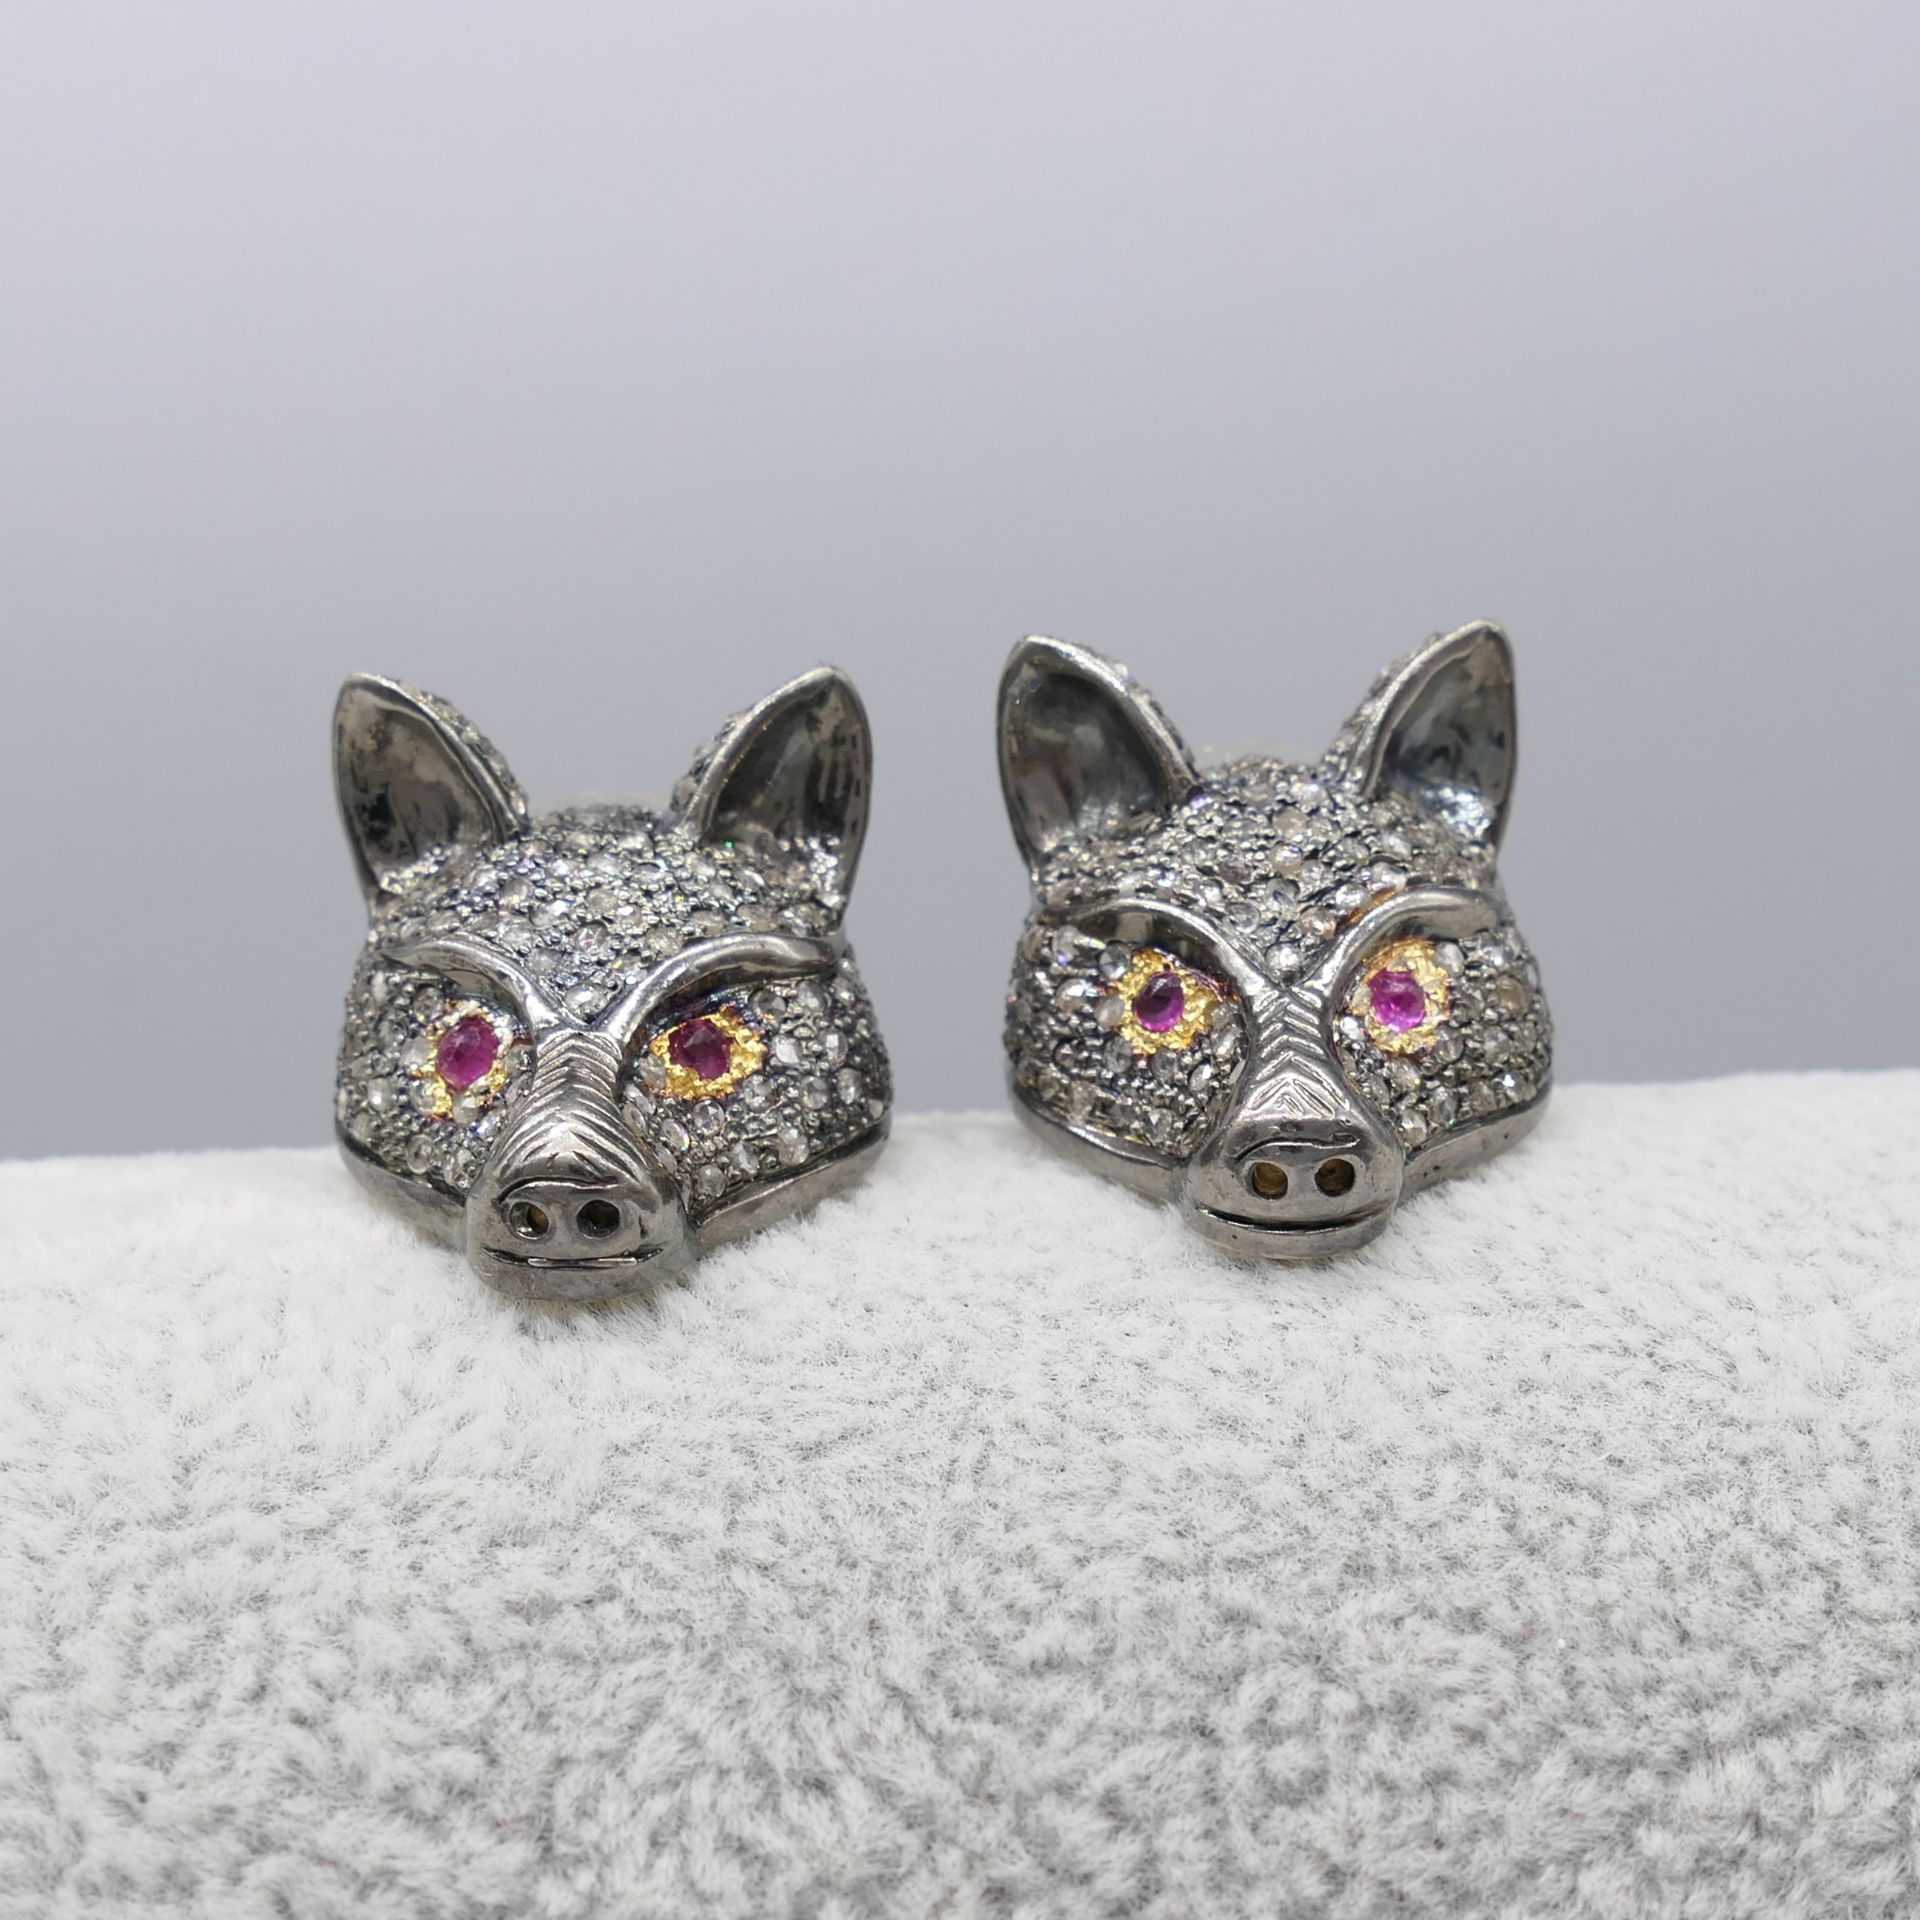 Pair of Unusual Diamond Encrusted Fox-Themed Earrings With Ruby-set Eyes, Boxed - Image 4 of 6